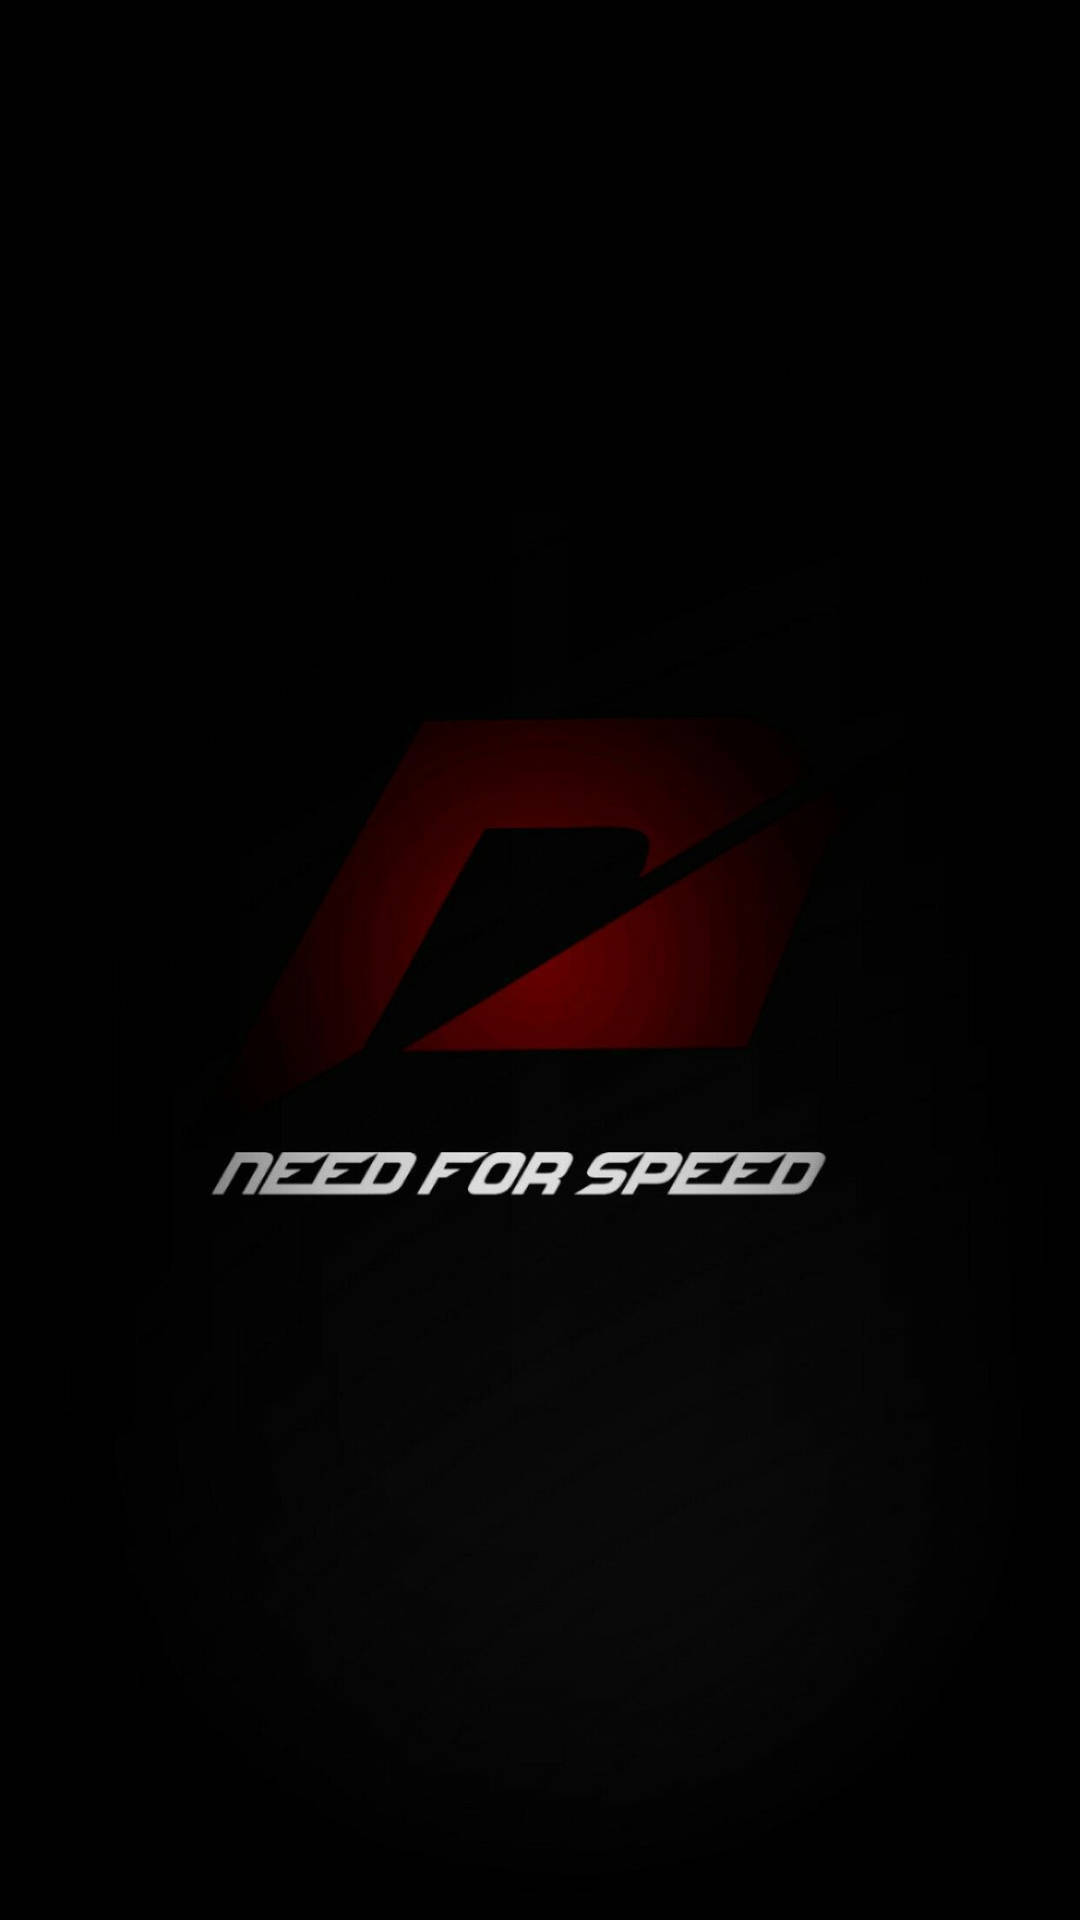 Need For Speed Game Logo Black Aesthetic Iphone Background